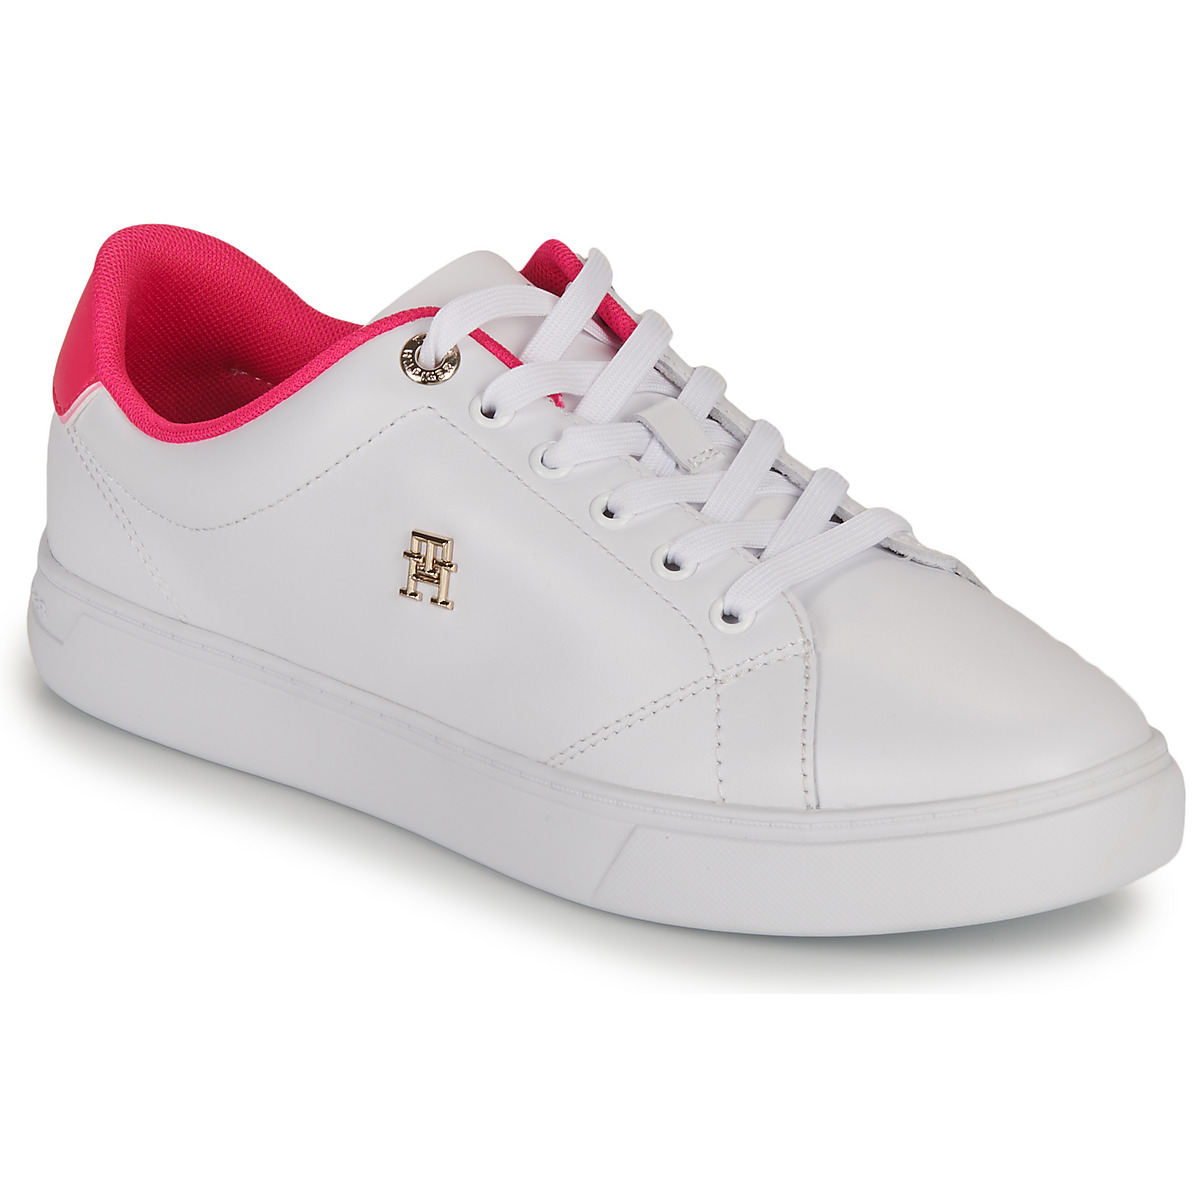 Chaussures Femme Tommy Jeans Borsa a spalla nero rosso acceso bianco blu scuro ELEVATED ESSENTIAL COURT SNEAKER Blanc / Rose